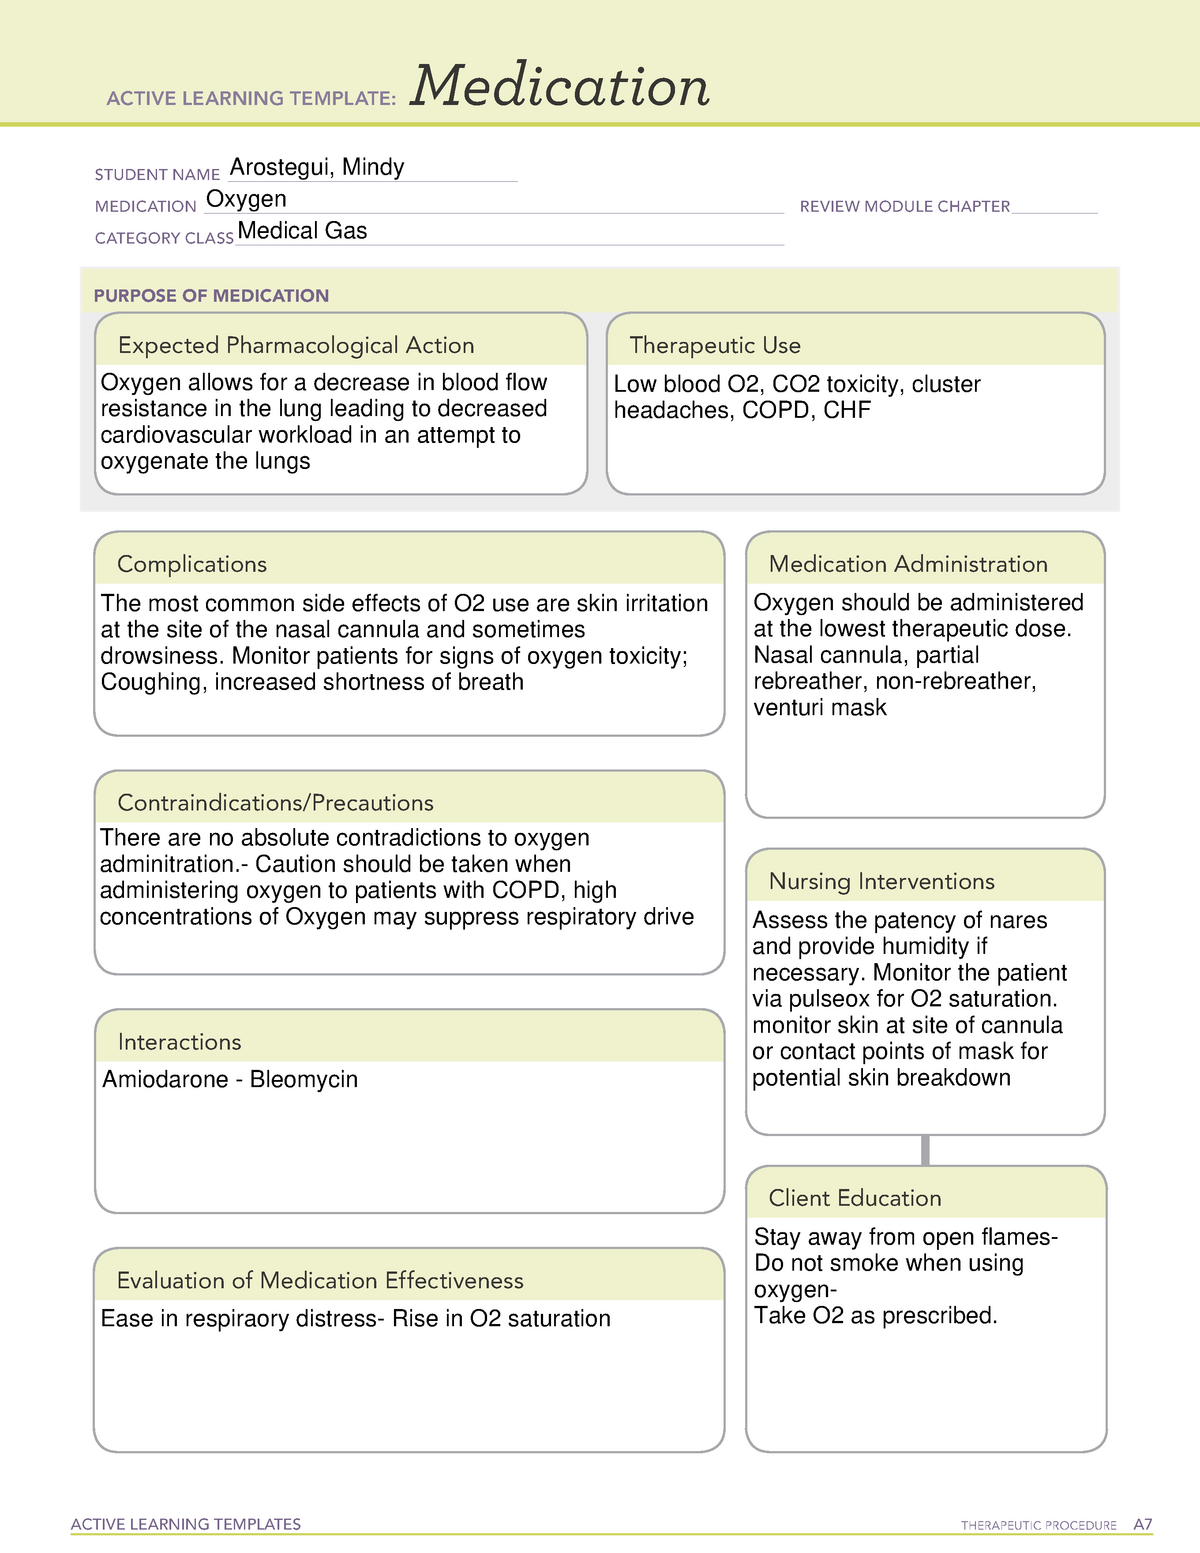 Oxygen ATI med card ACTIVE LEARNING TEMPLATES THERAPEUTIC PROCEDURE